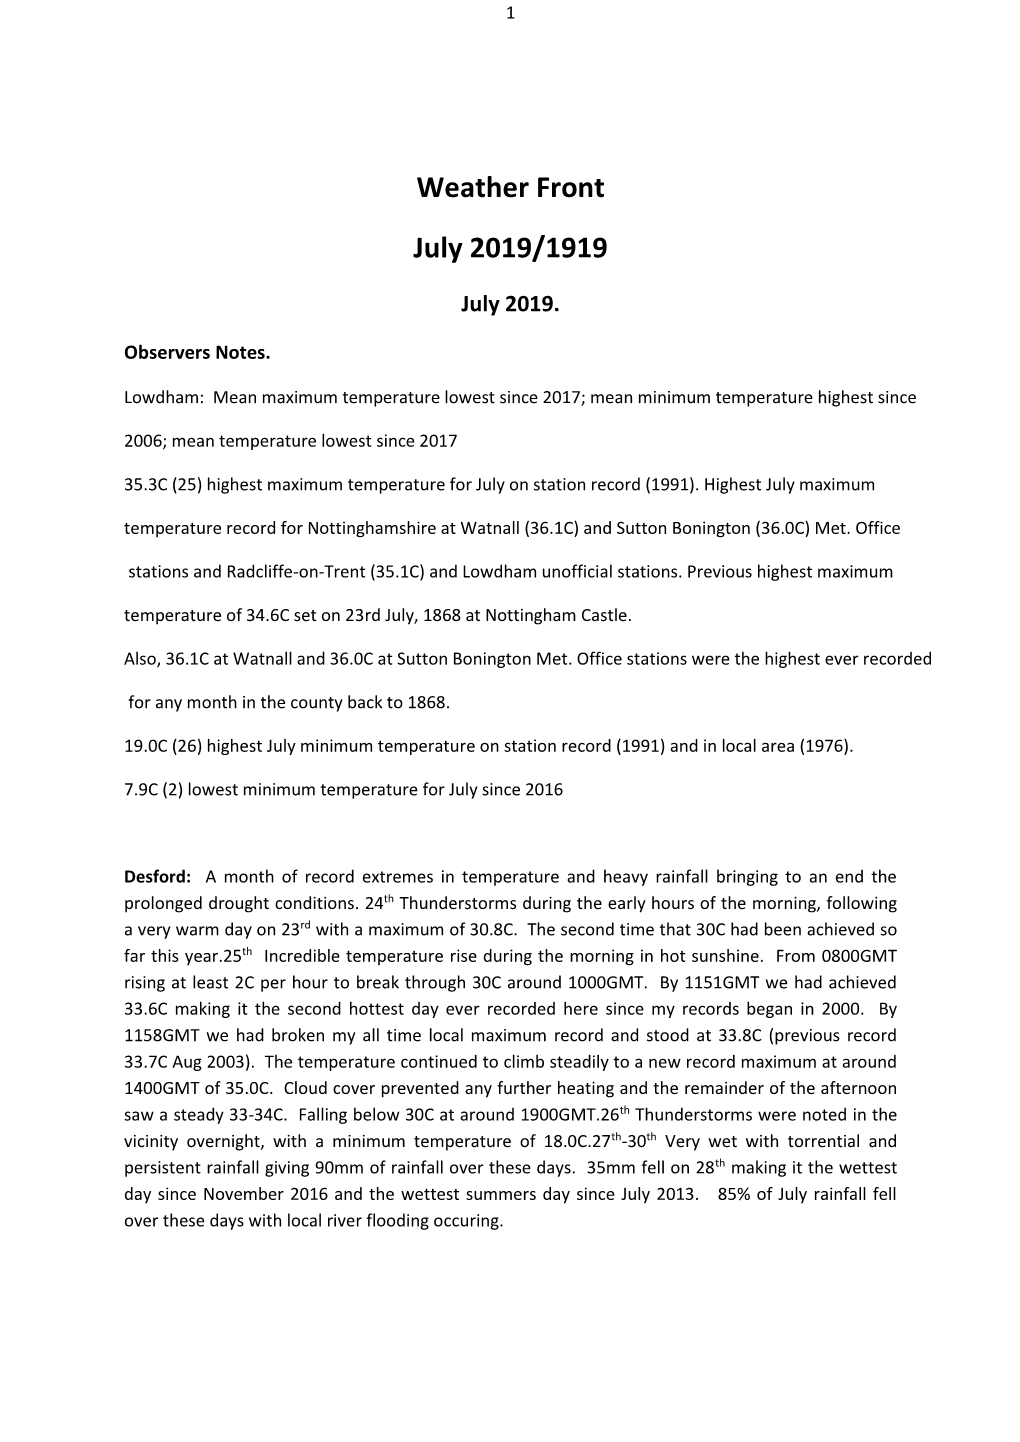 Weather Front July 2019/1919